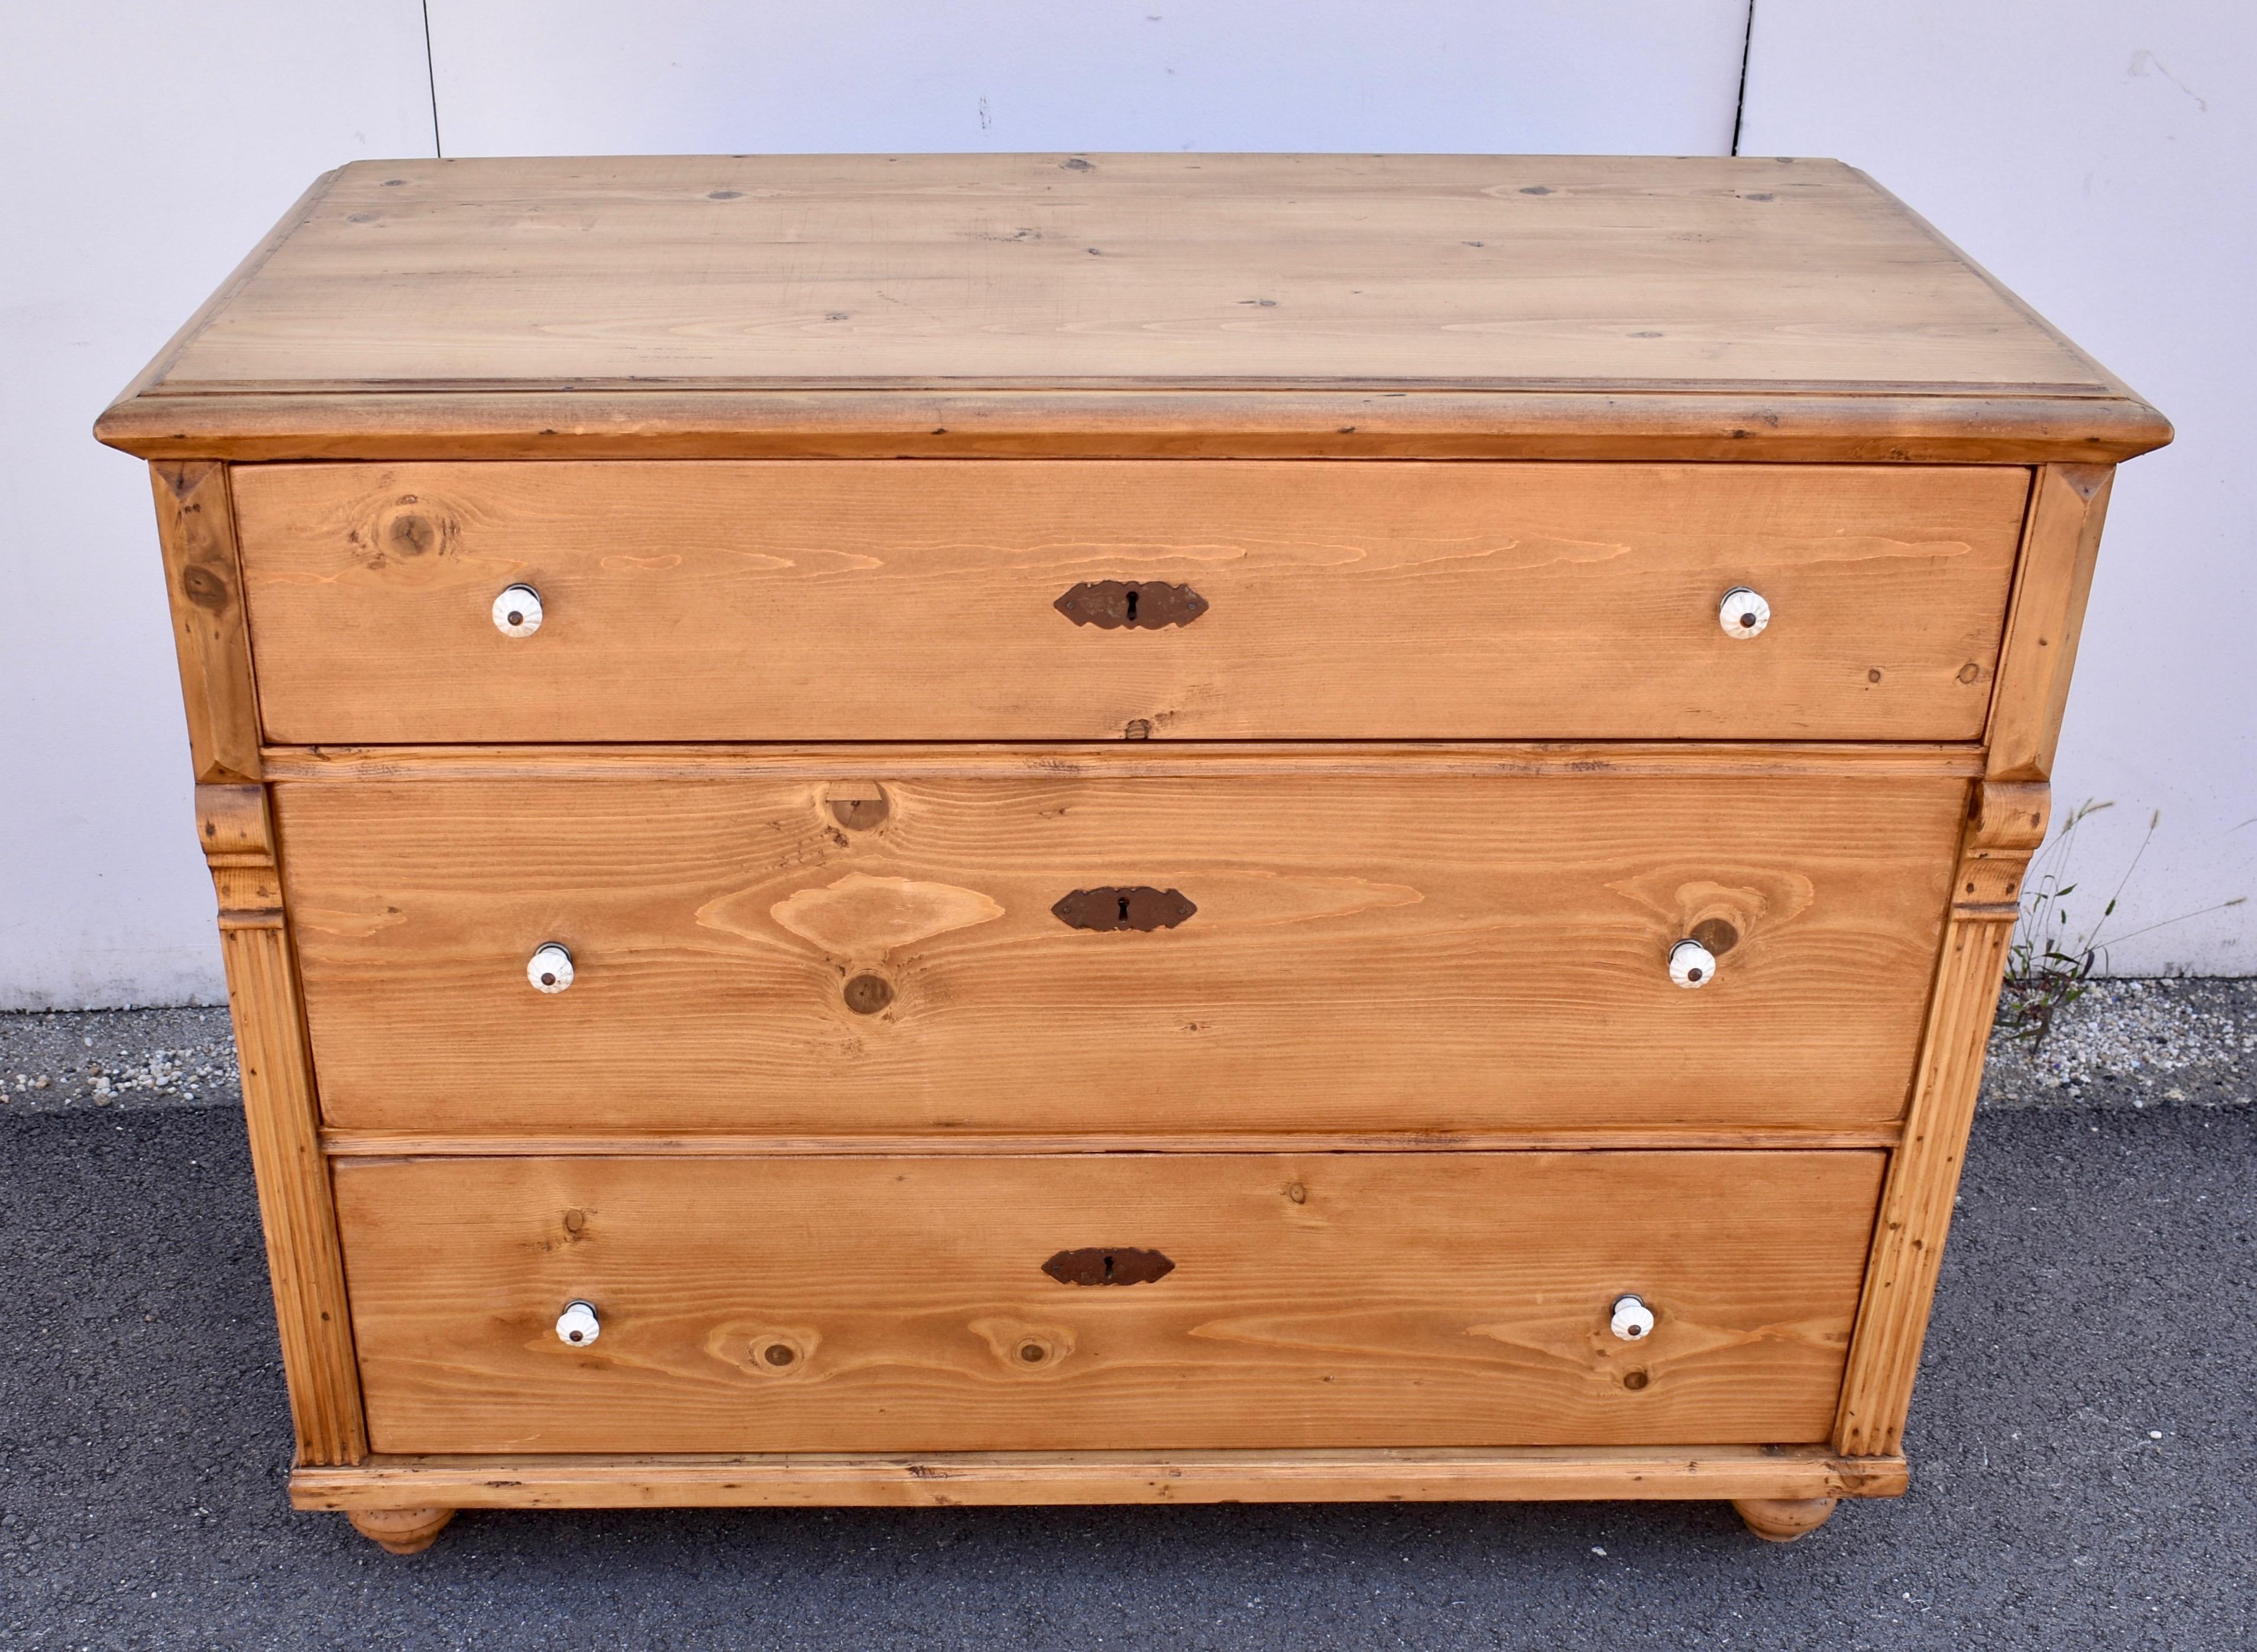 This is a splendid three drawer chest with an interesting configuration of drawers.  The top drawer is shallow and the middle one is the deepest.  The bottom drawer is just in-between.  All three have original ceramic knobs.  Applied crown molding